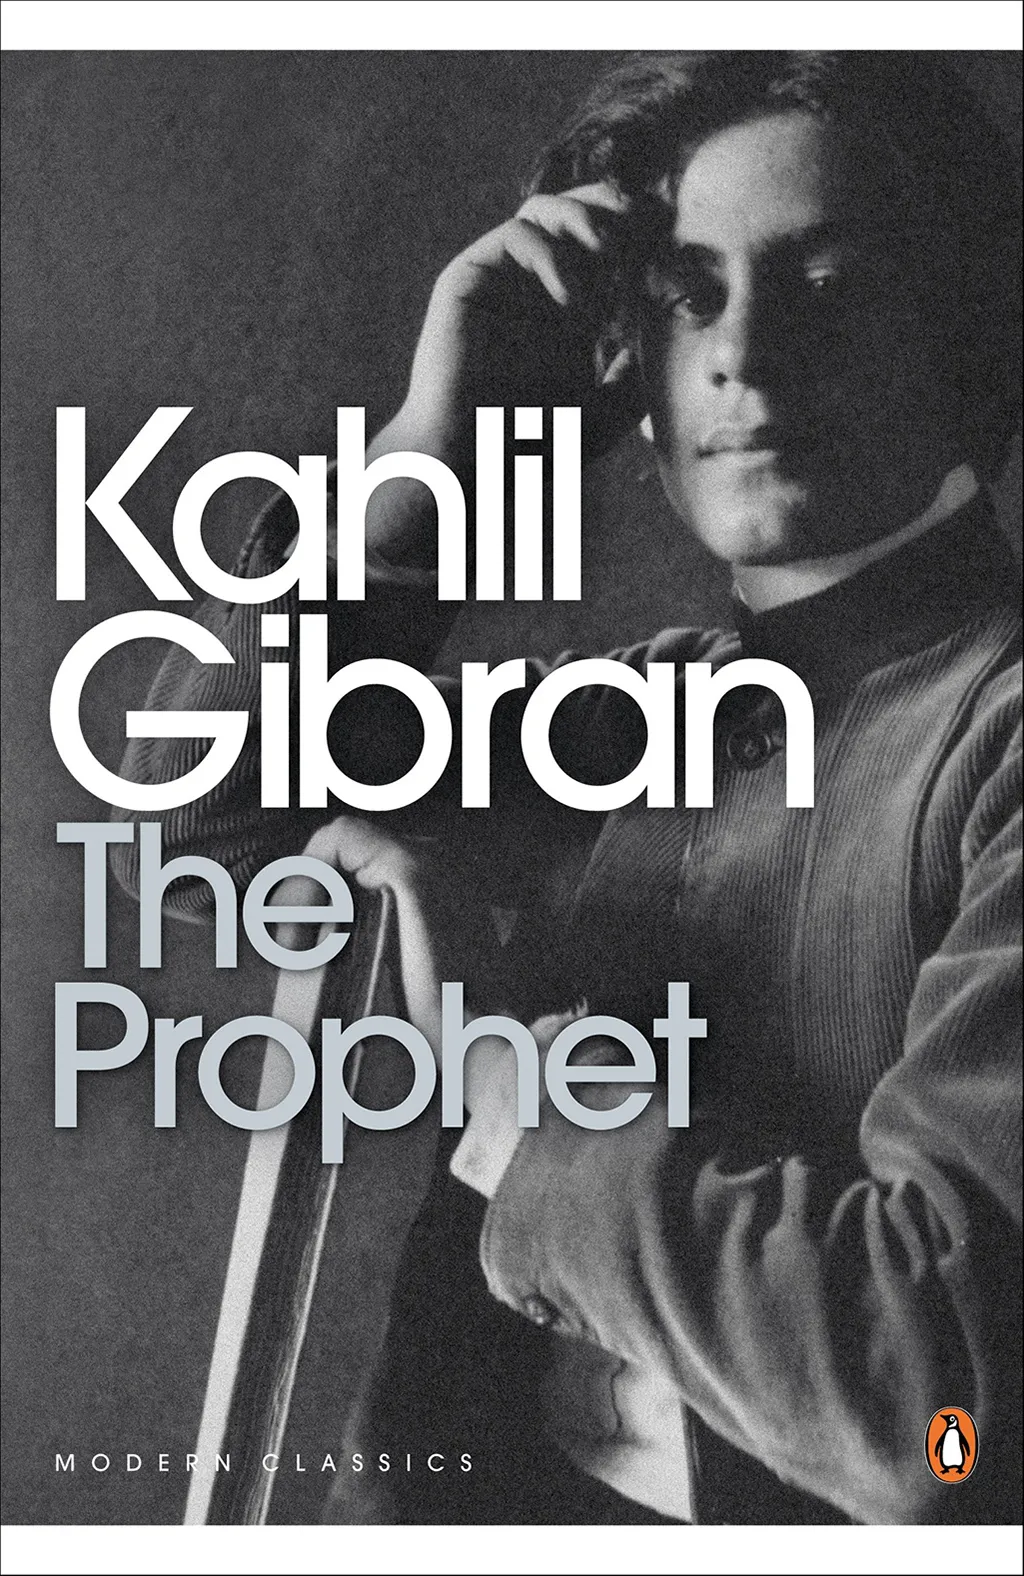 the prophet, books every man should read